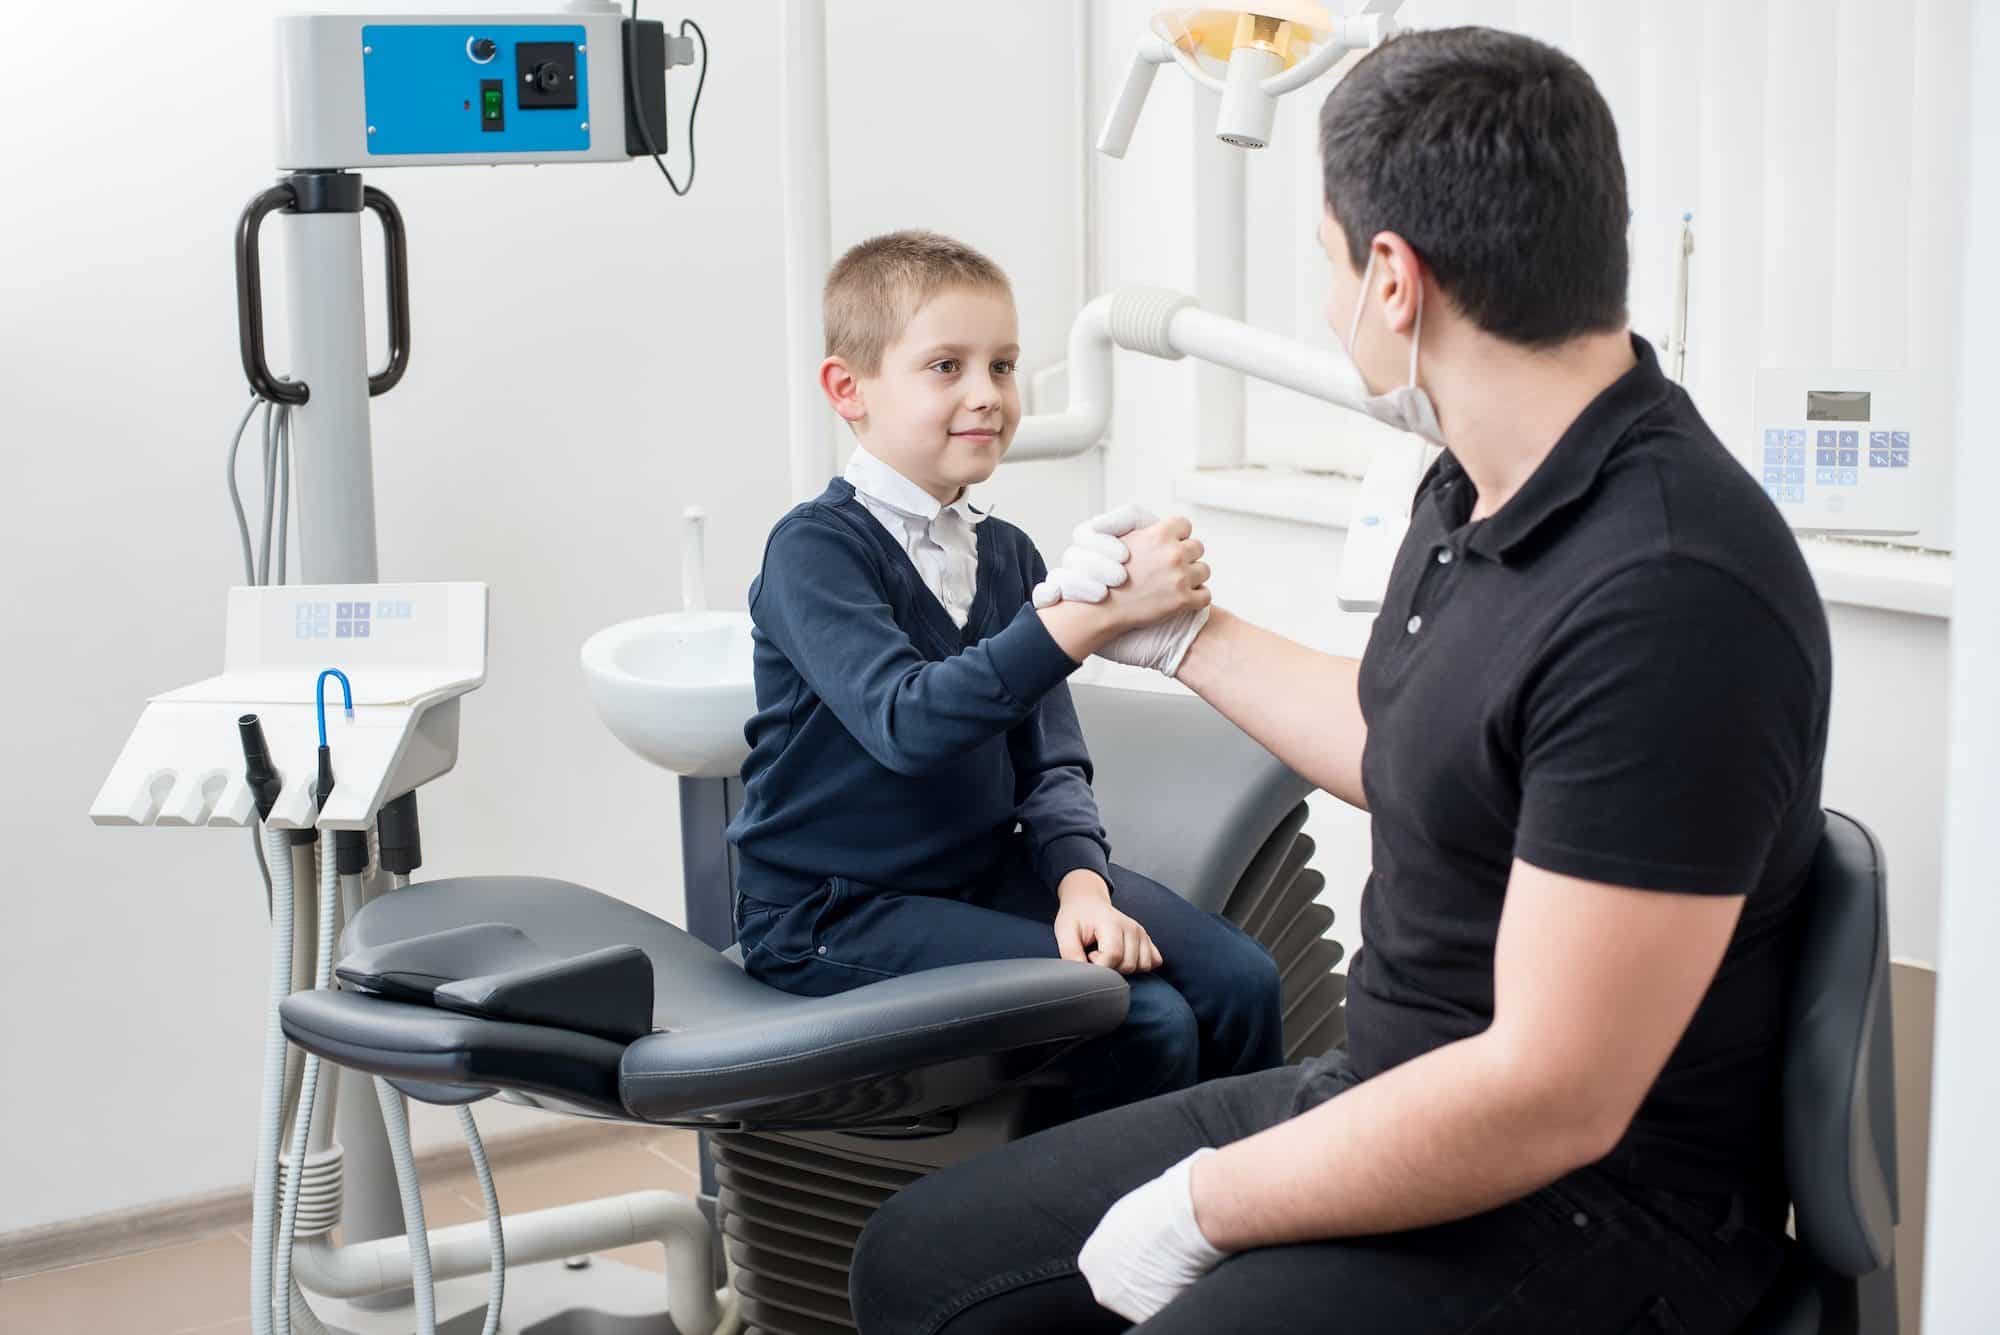 Pediatric dentist shake hands with young boy.